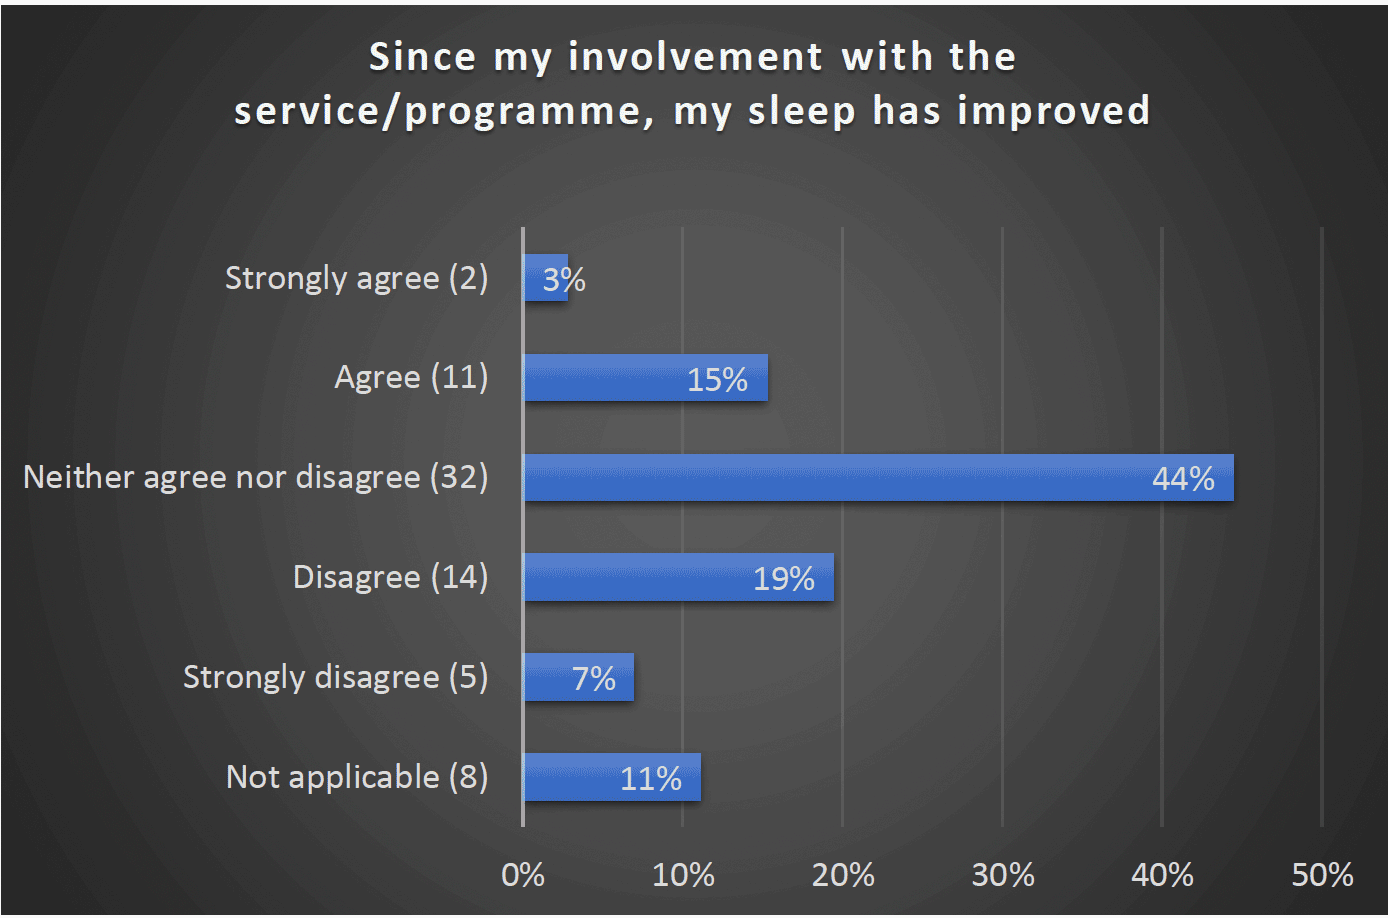 Since my involvement with the service/programme, my sleep has improved - Strongly agree (2) 3%, Agree (11) 15%, Neither agree nor disagree (32) 44%, Disagree (14) 19%, Strongly disagree (5) 7%, Not applicable (8) 11%